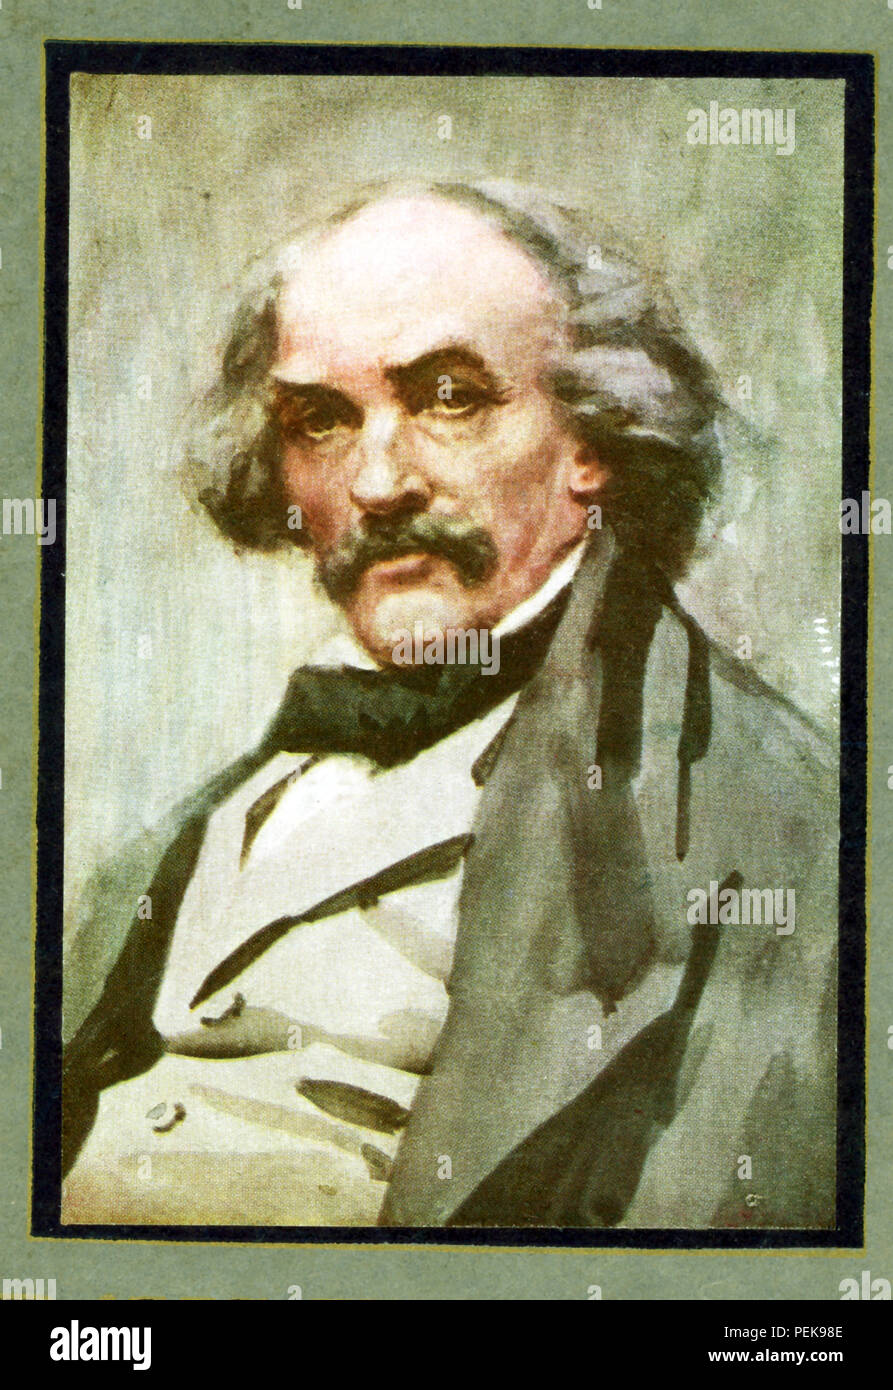 Nathaniel Hawthorne (1804-1864) was an American novelist and short story writer. His Wonder-Book and Tanglewood Tales are children’s classics. He also wrote The Scarlet Letter, Blithedale Romance, The House of Seven Gables, The Marble Faun. With his superb creation of dark-hued atmosphere, his symbolism, and his blend of realistic detail and romantic-even melodramatic theme, Hawthorne stands as one of America’s top novelists. This image of Hawthorne dates to the early 1900s. Stock Photo